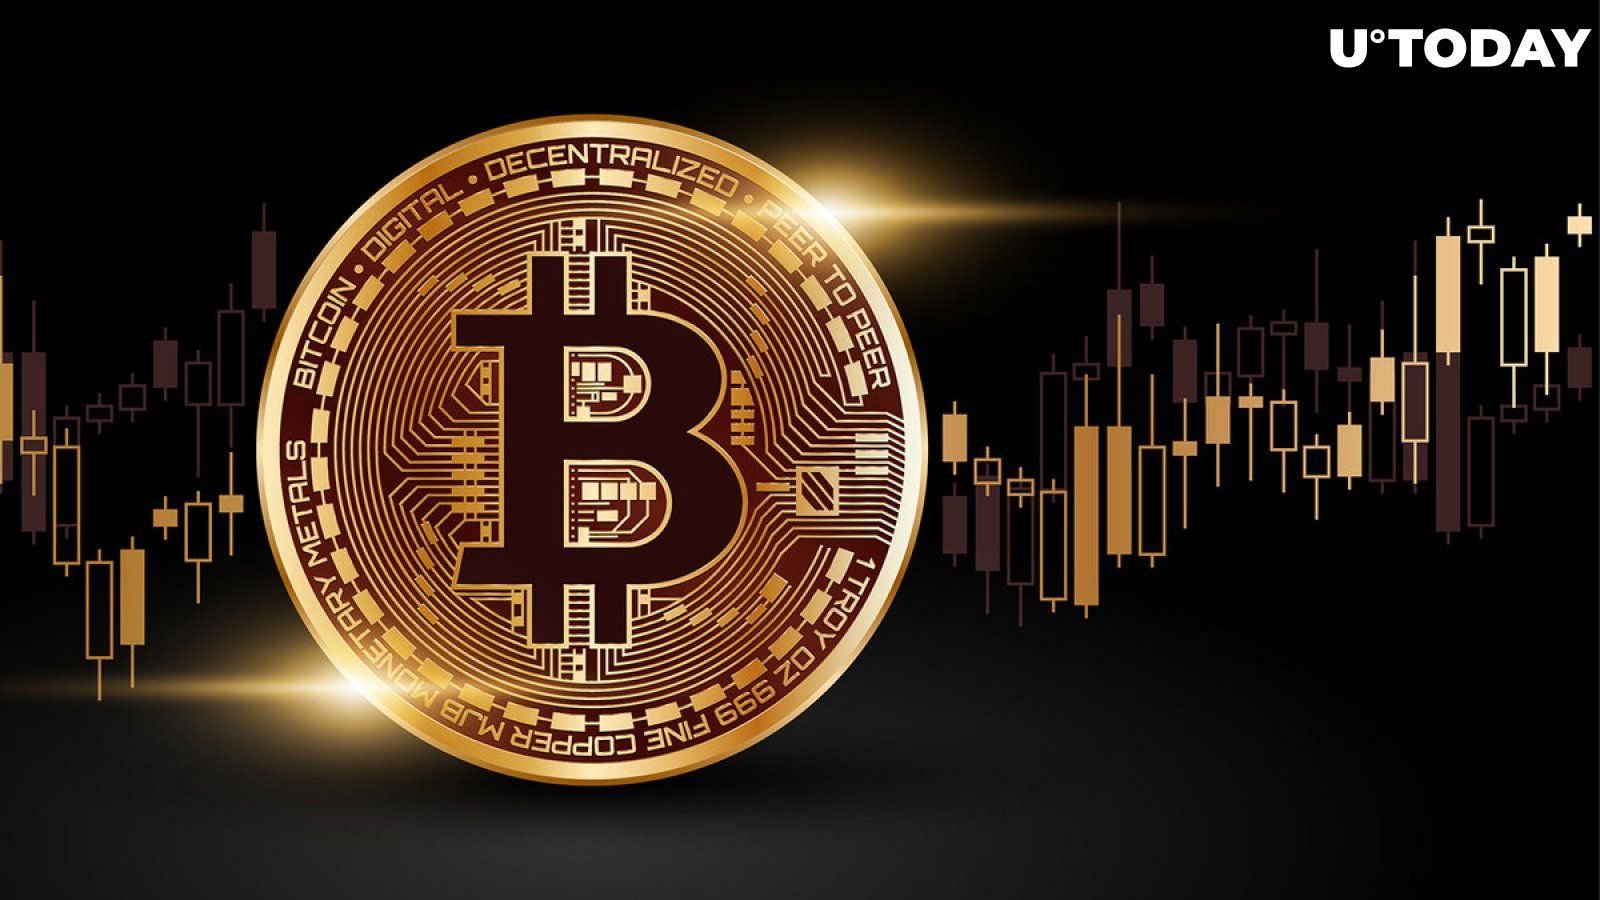 Bitcoin Network Shows High Potential for BTC Price Surge: Analyst